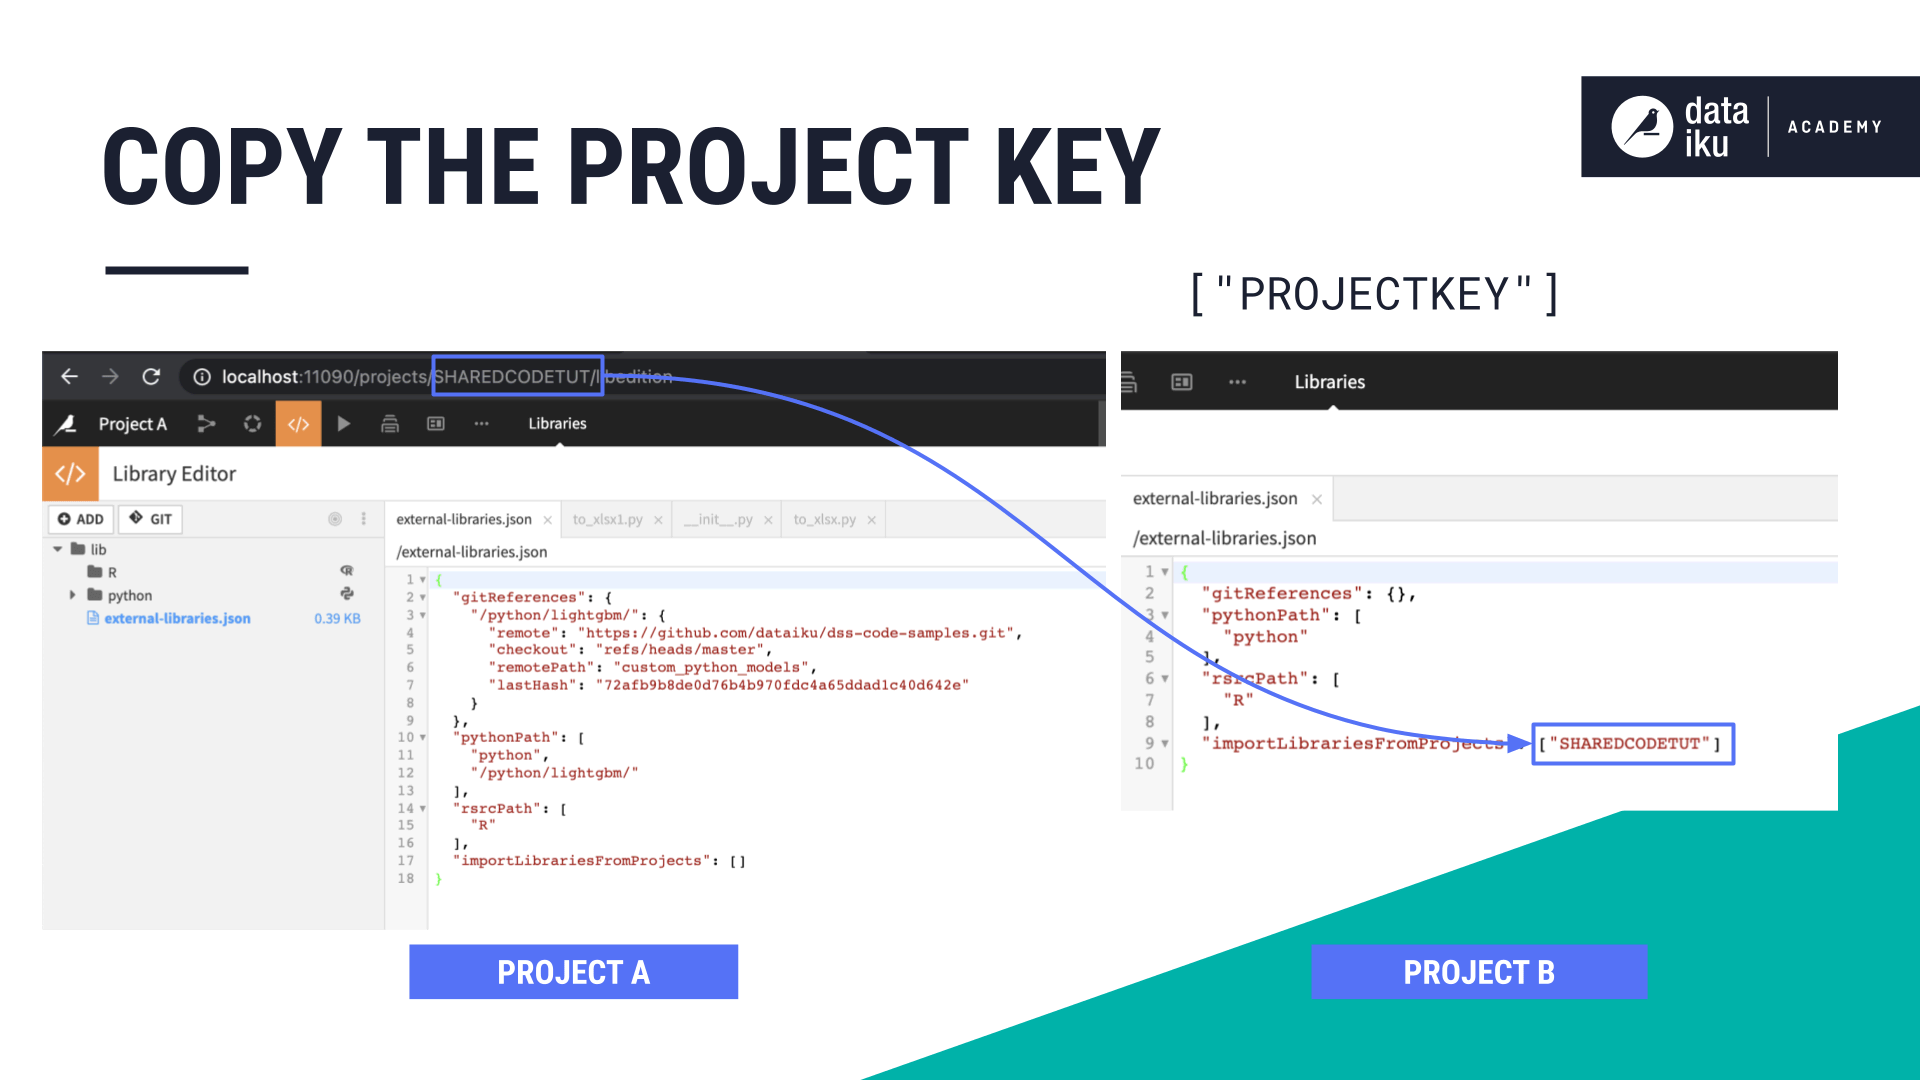 Slide demonstrating how to copy a project key to share code from another project.